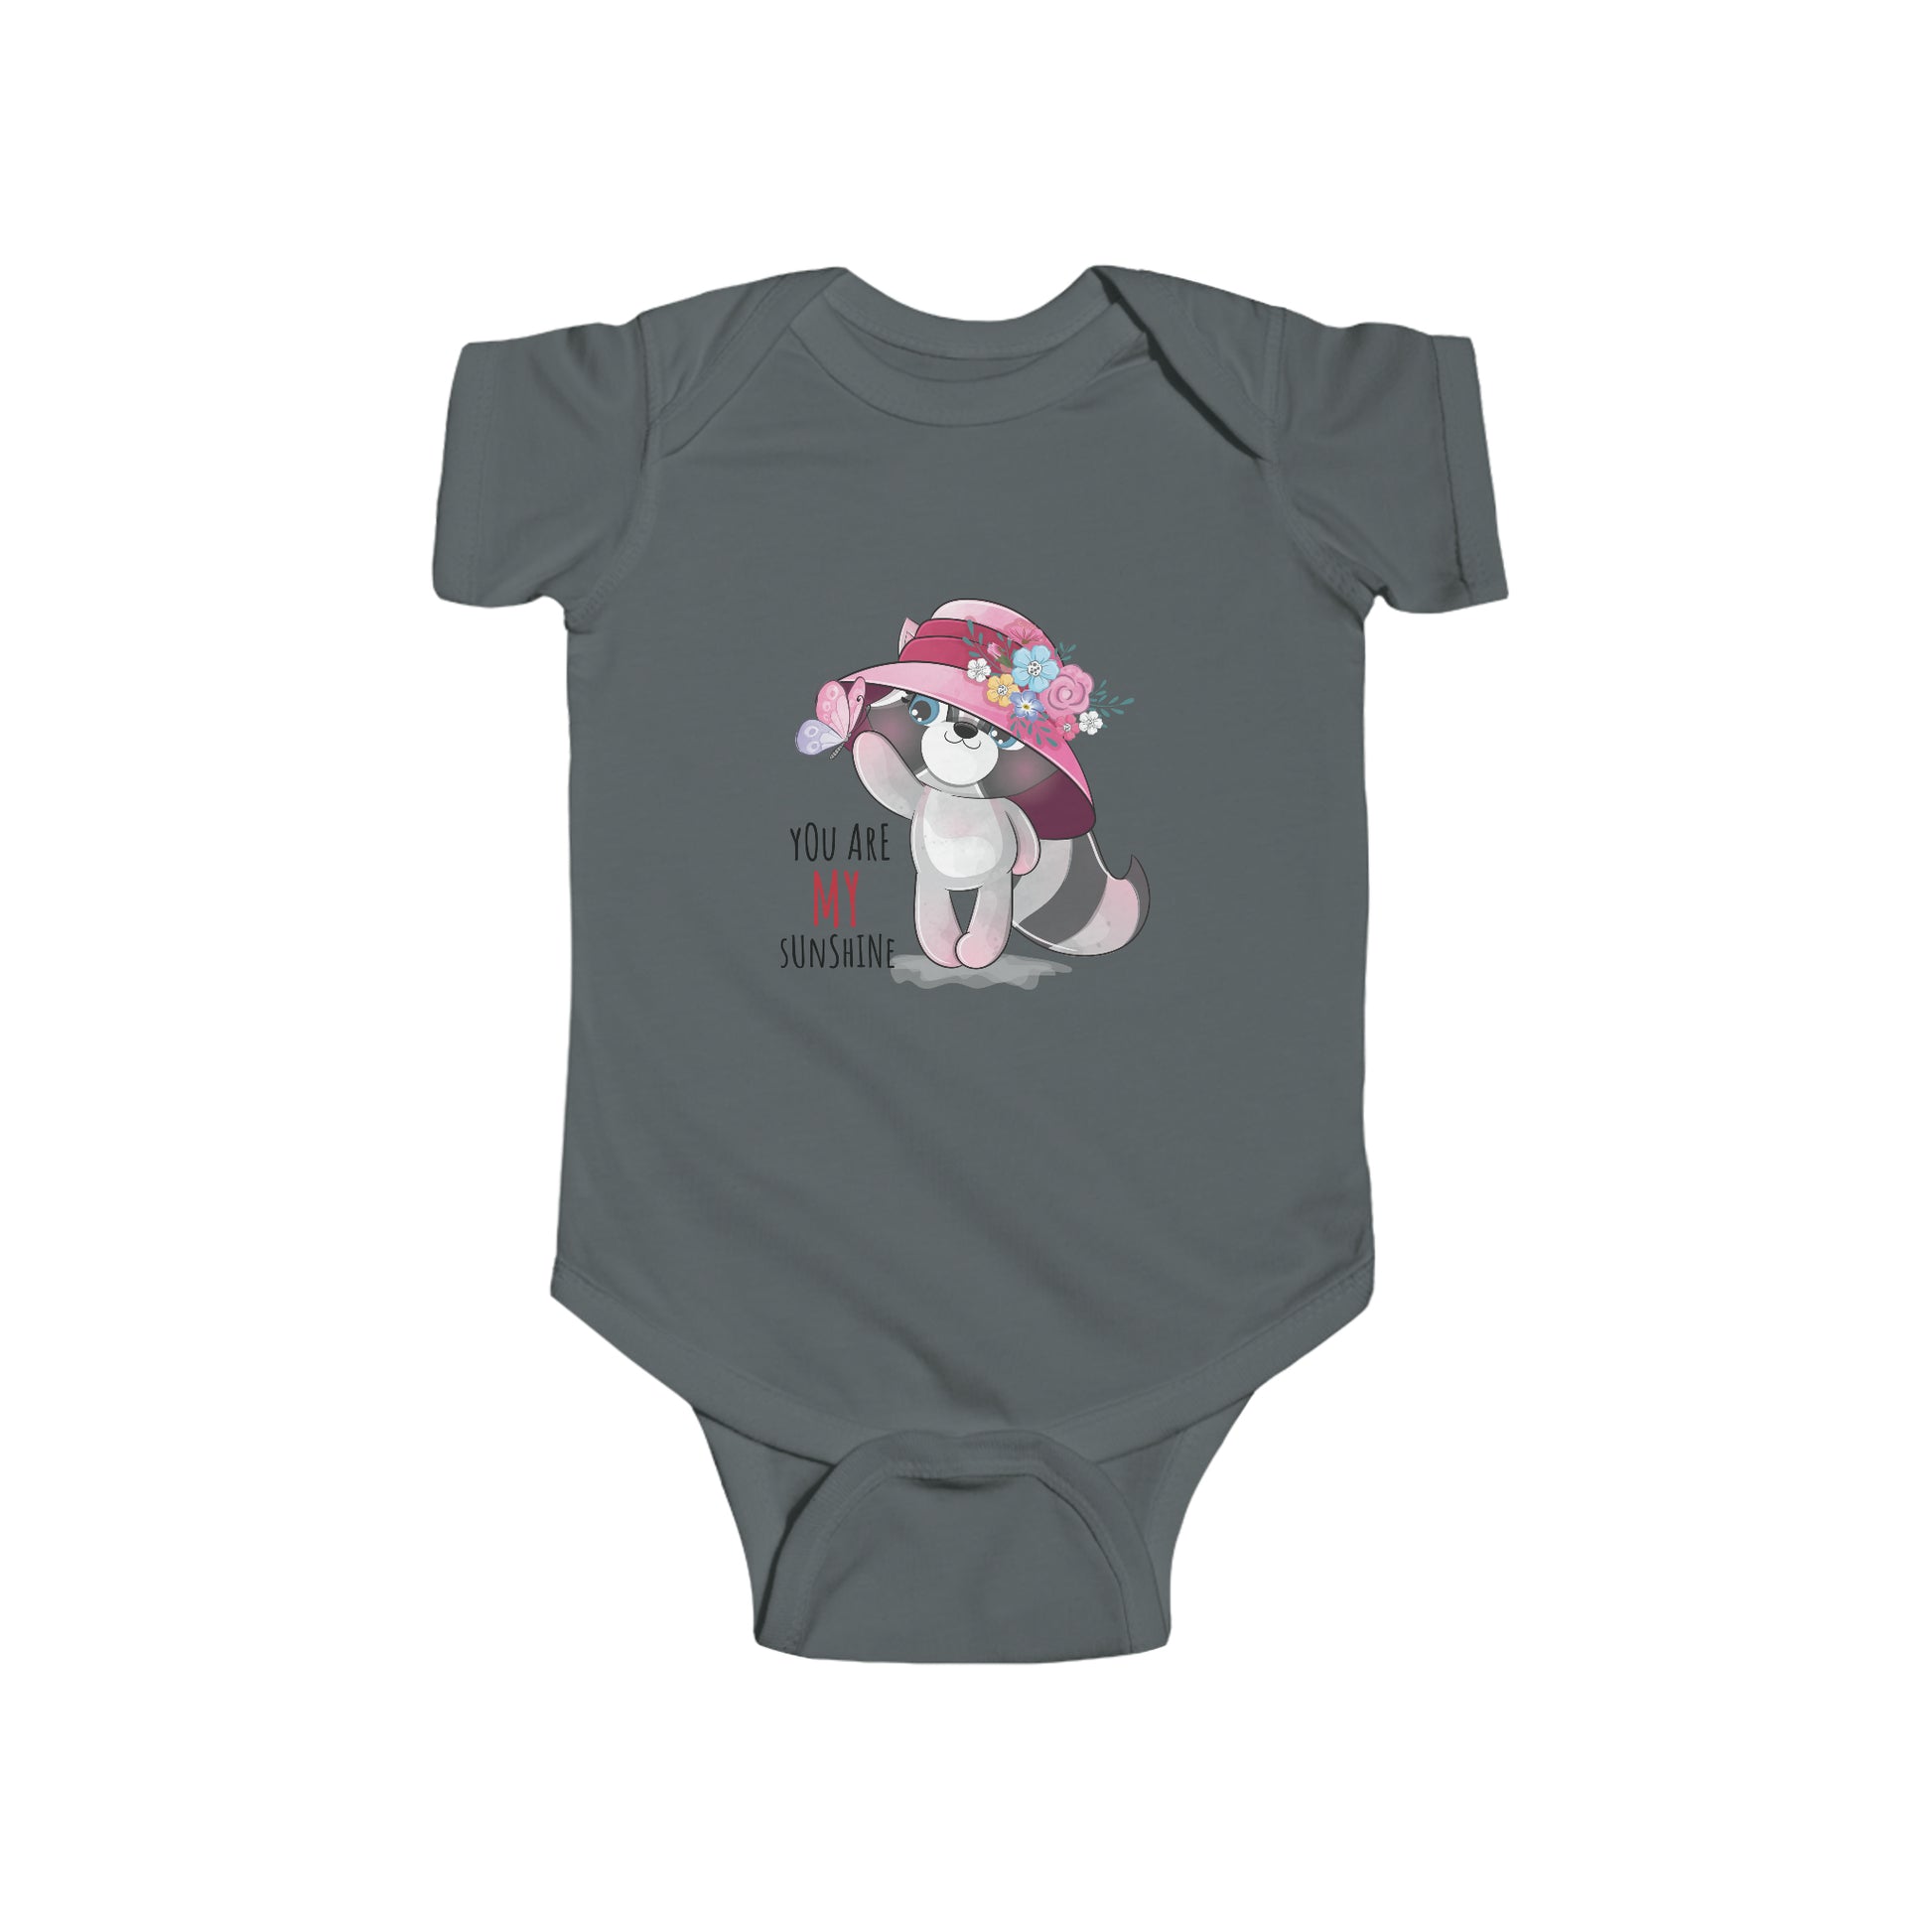 Baby Shower Gifts, Cute Baby Outfits, Onesies® Brand Clothing